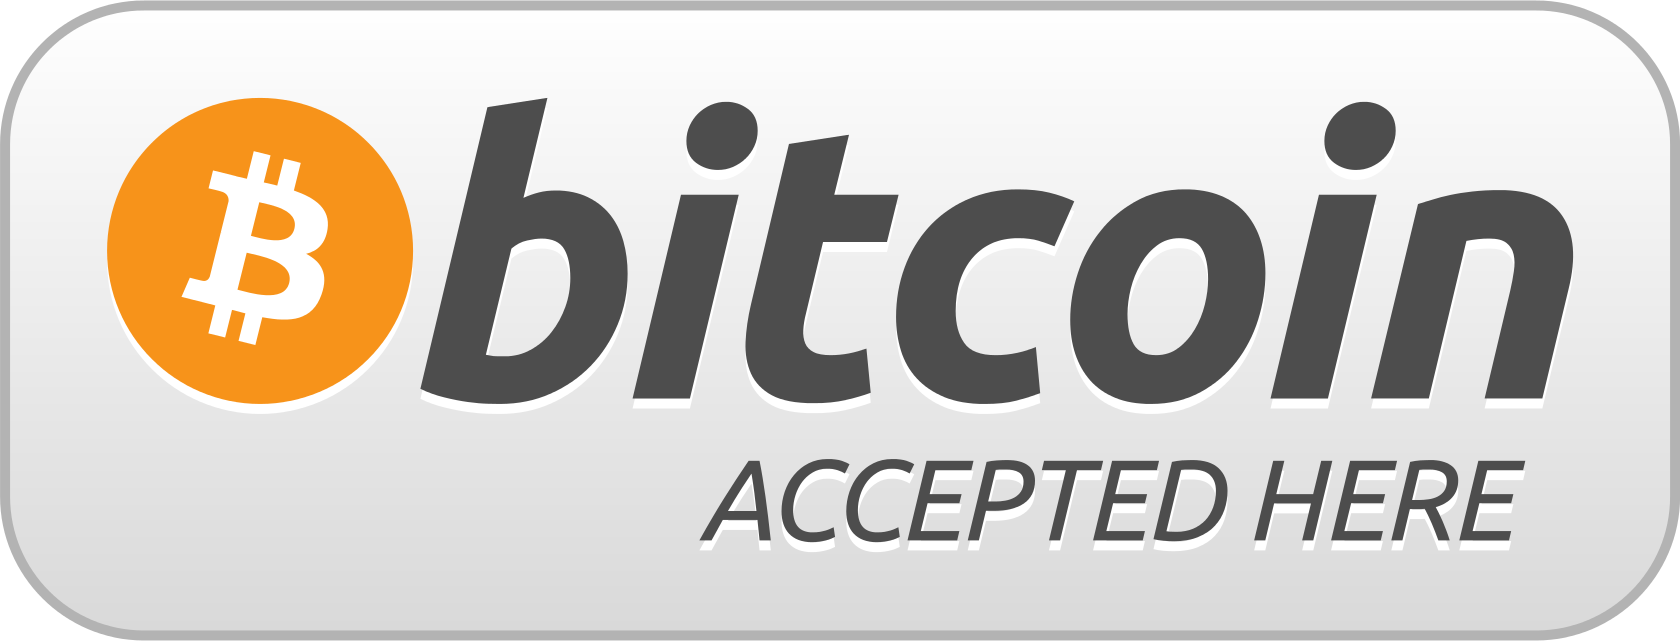 Bitcoin_accepted_here_printable.png